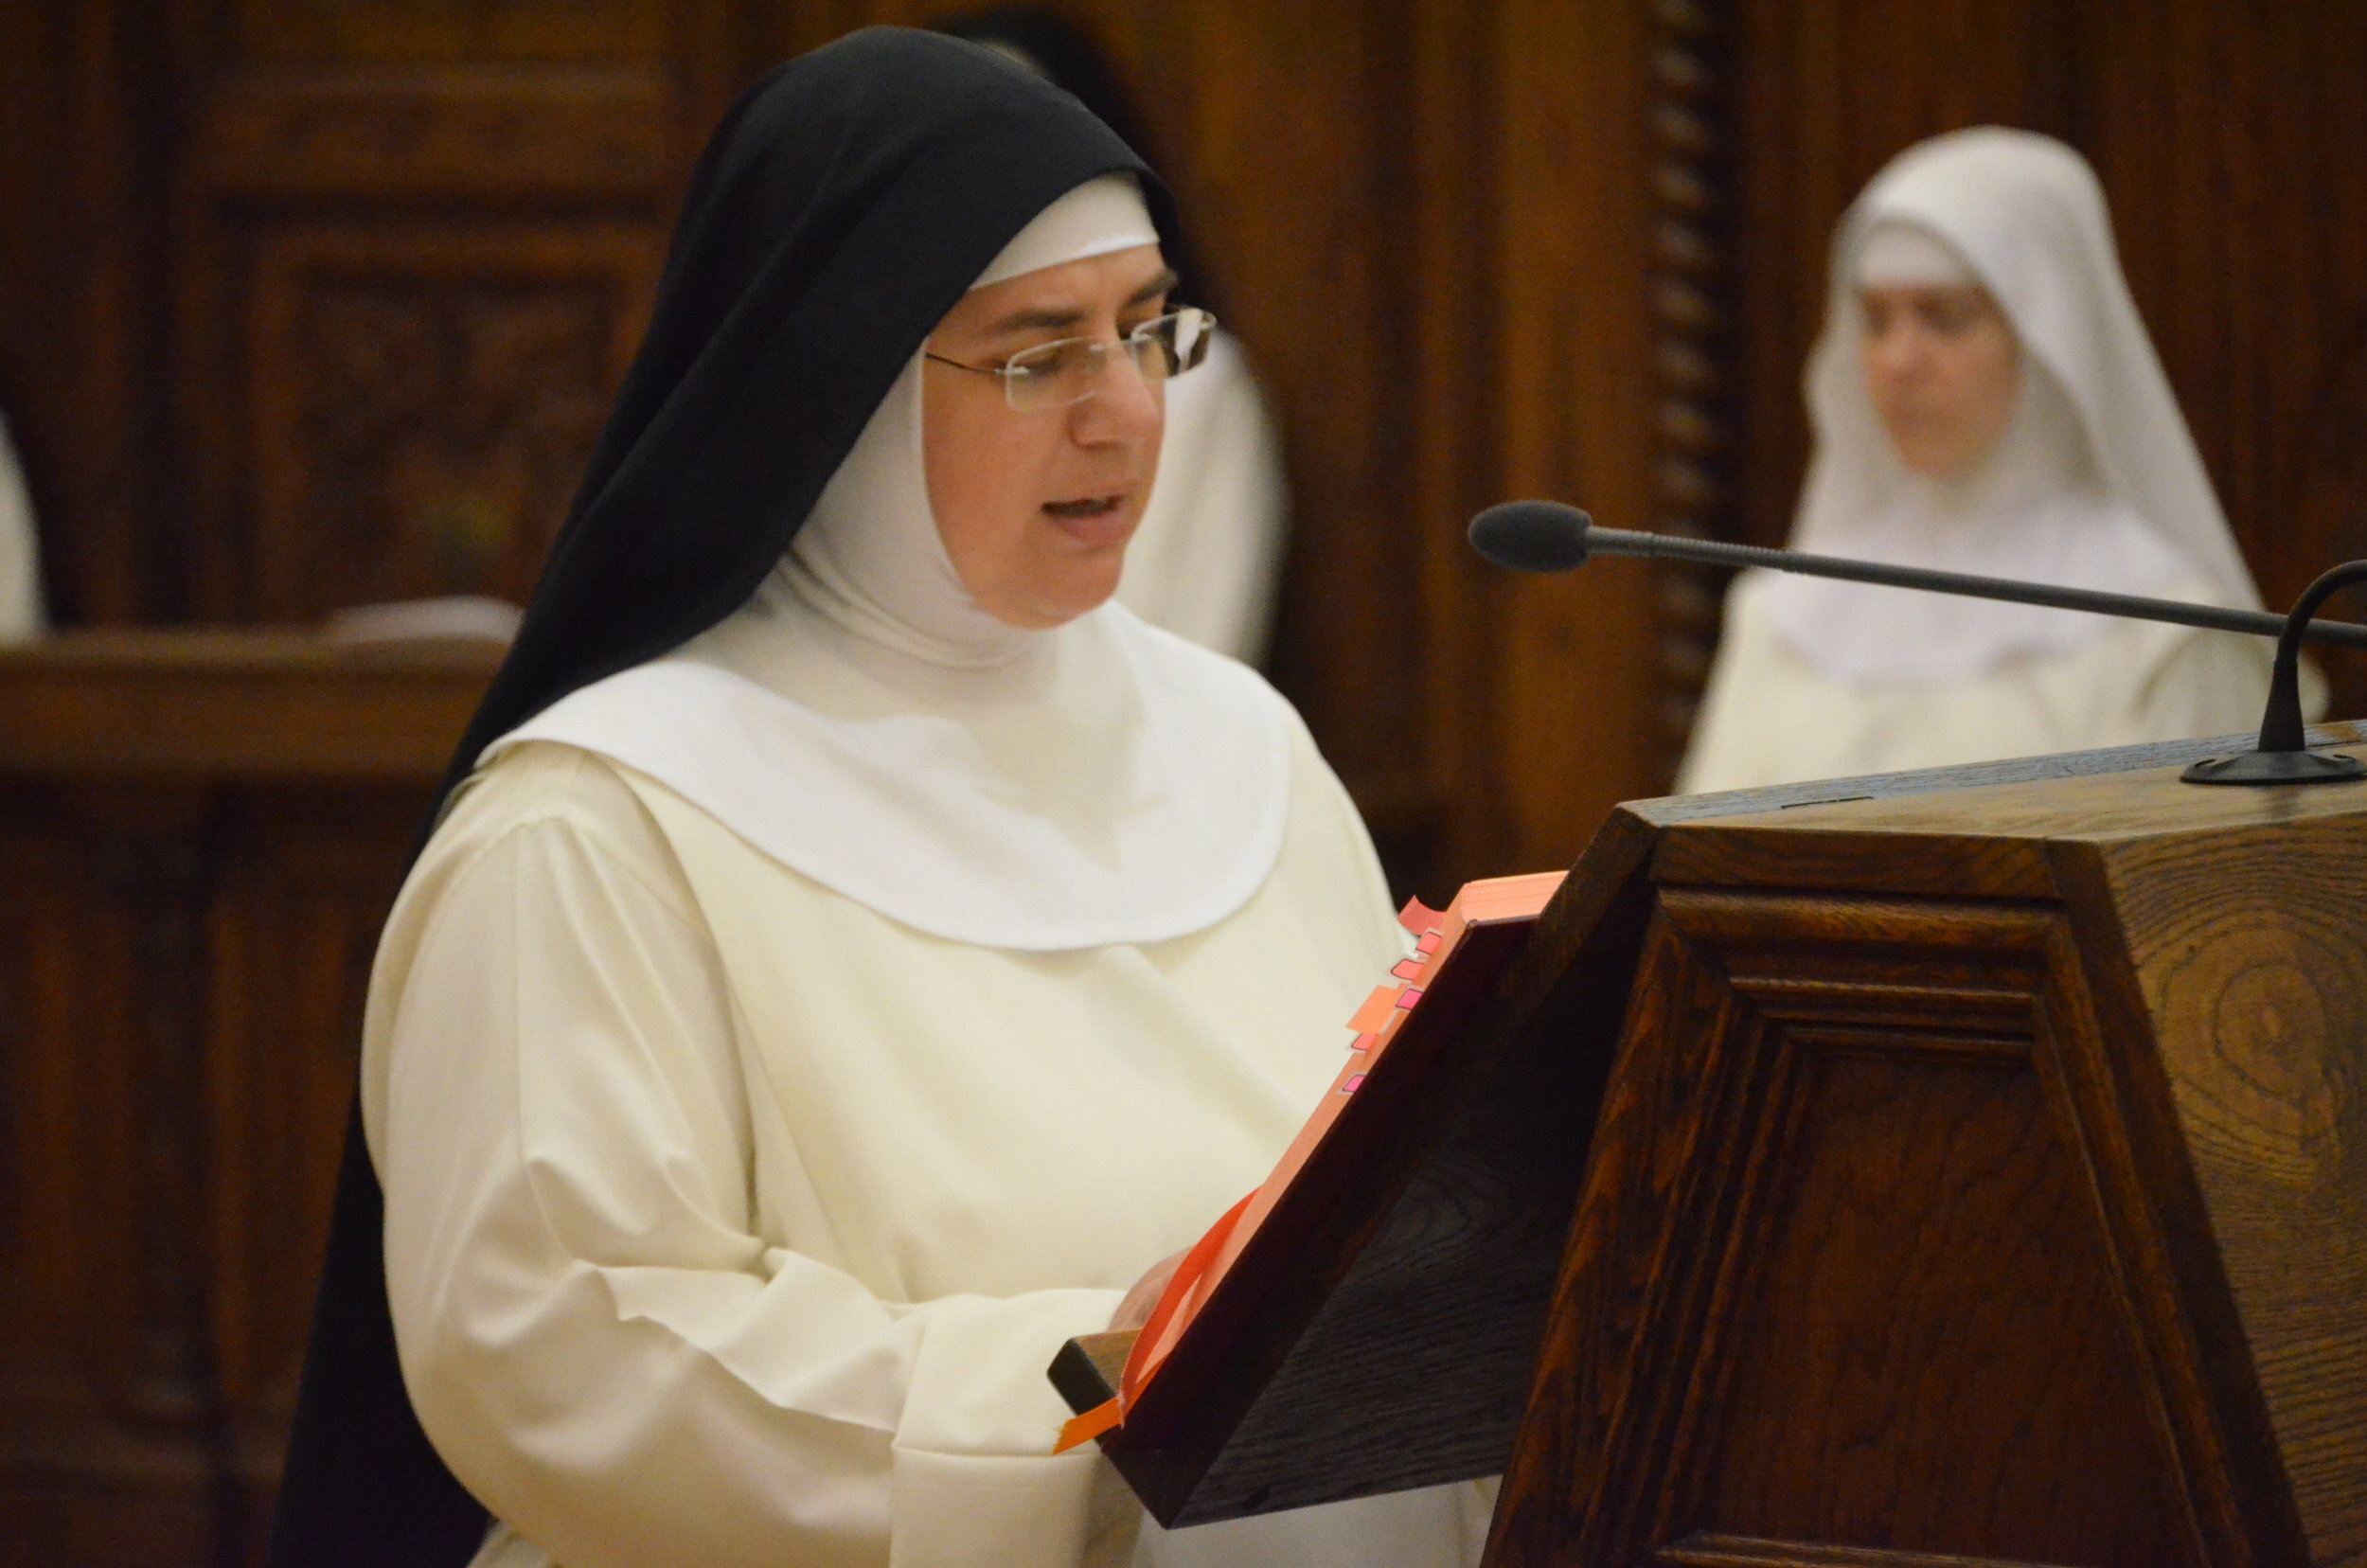 Sr. Mary Catharine chants the First Reading